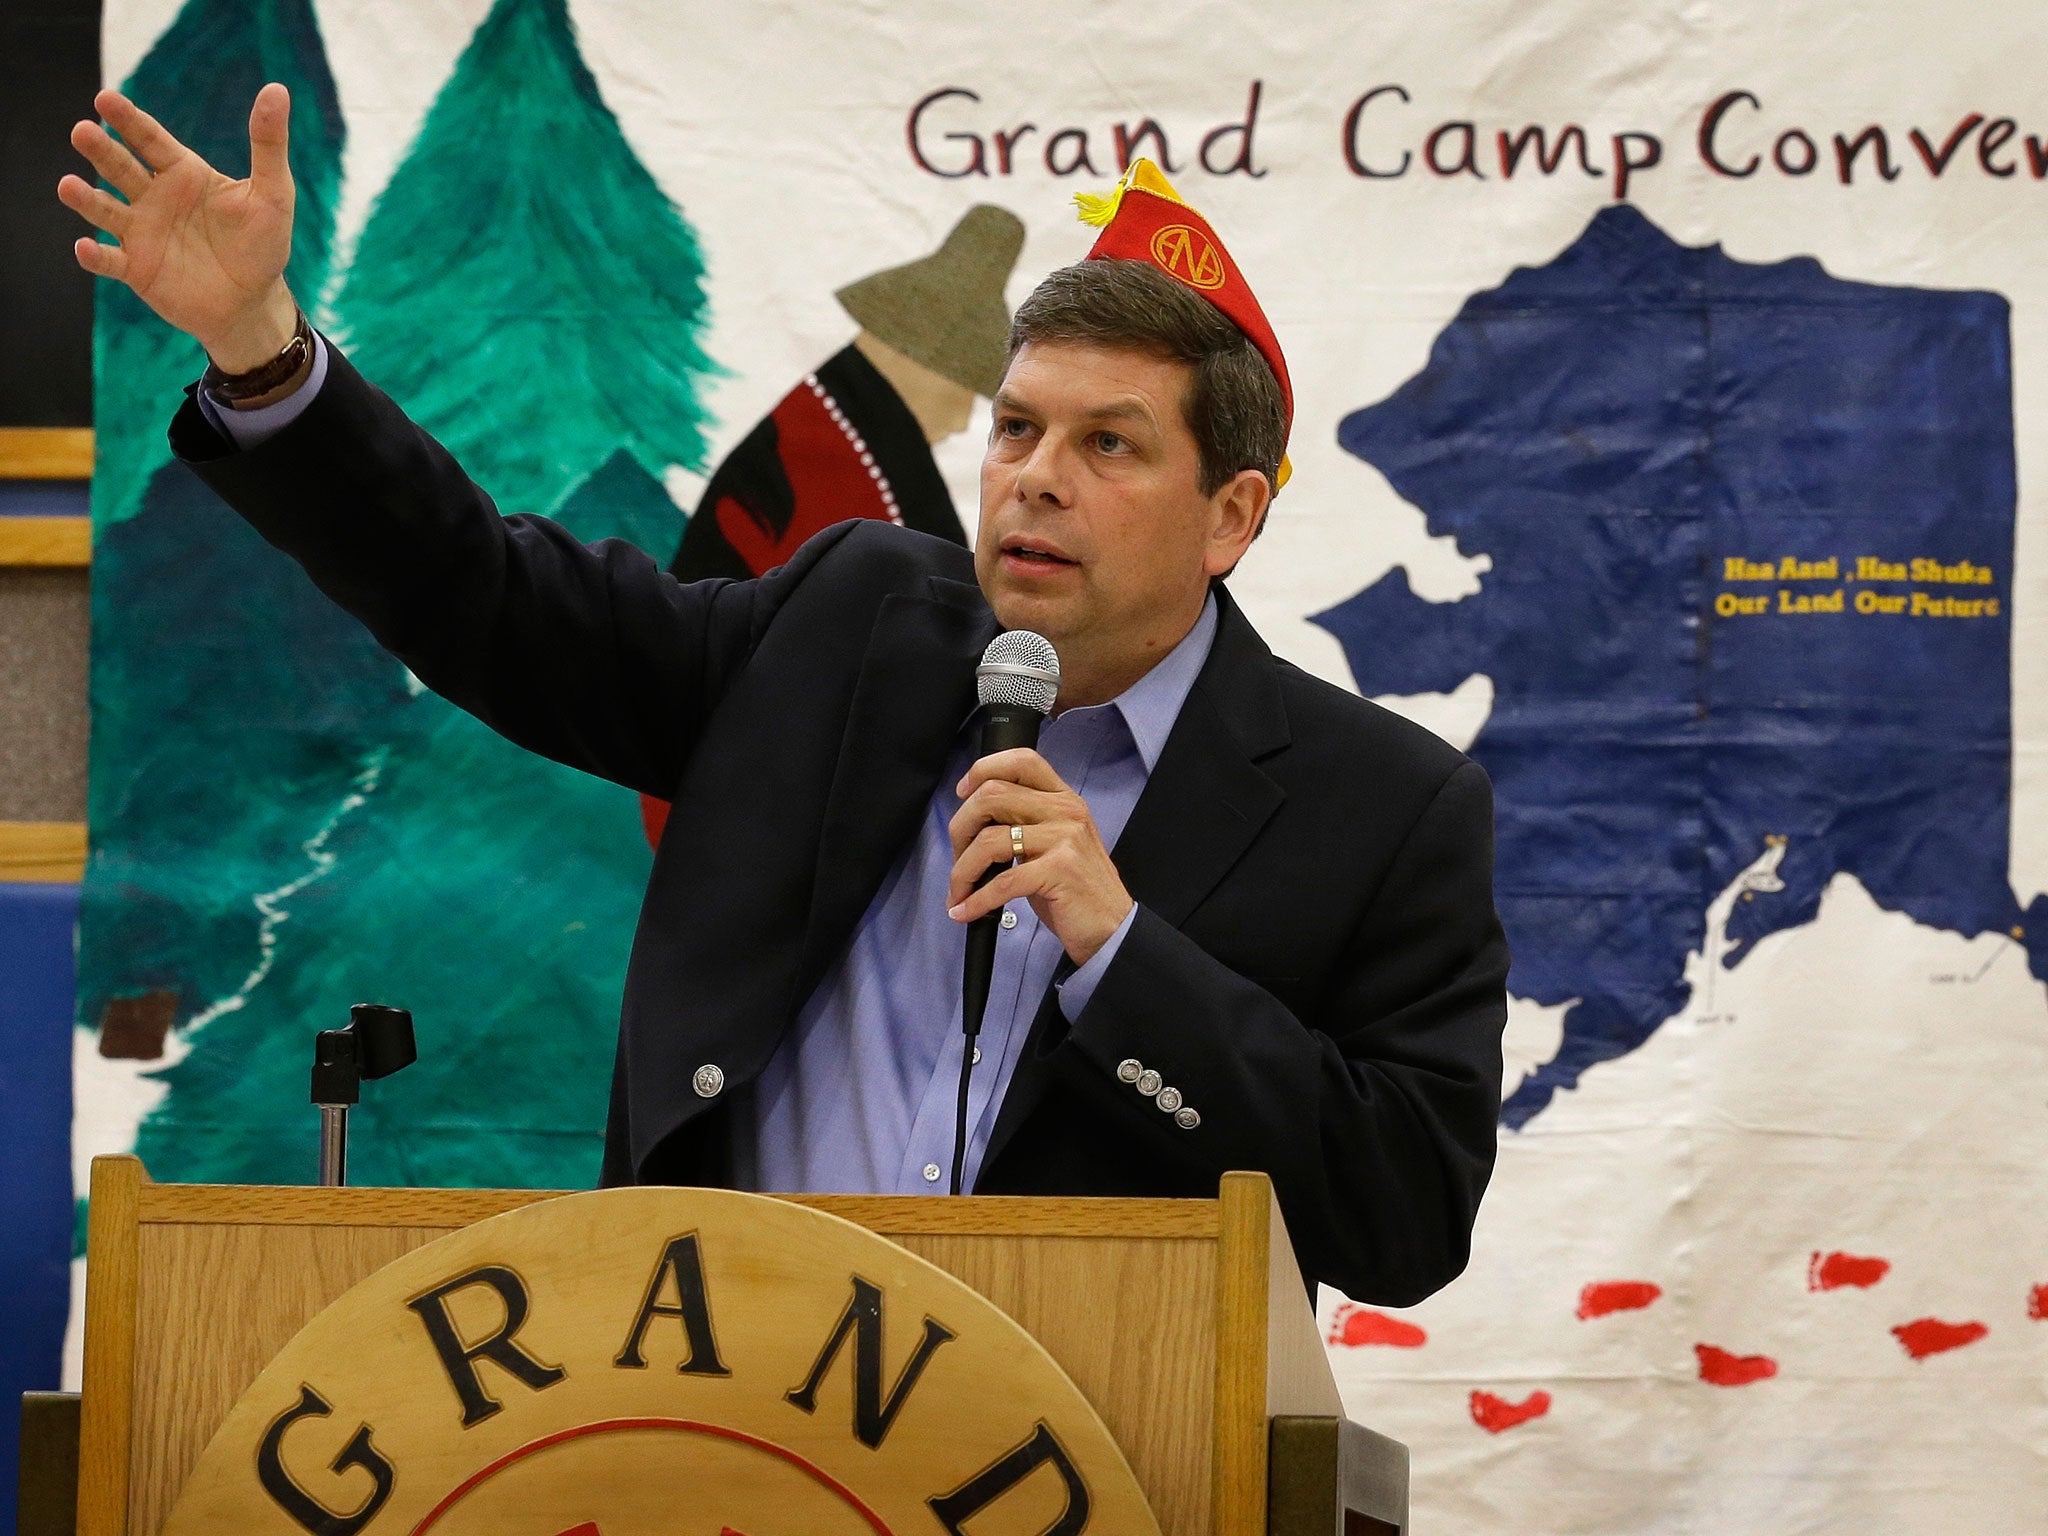 Incumbent Mark Begich was ahead of his Republican rival by almost 10 points in a poll on 24 October